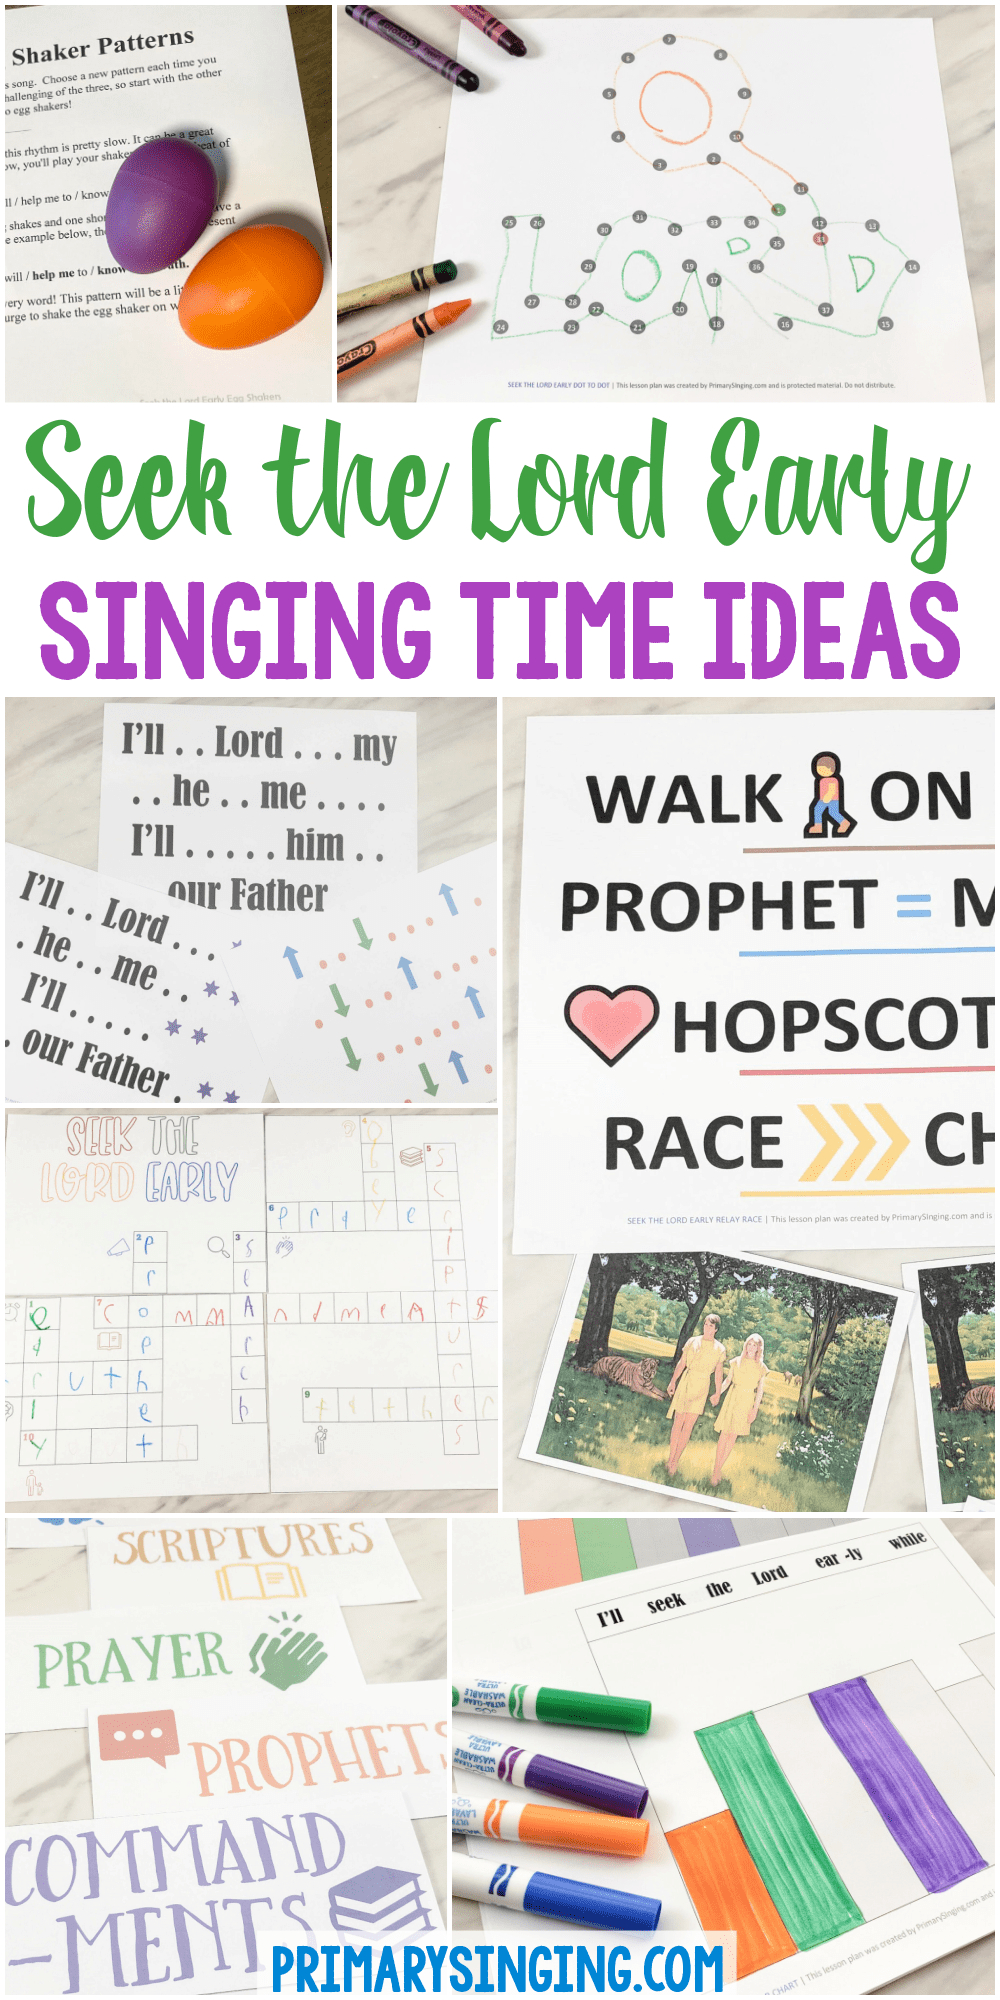 22 Seek the Lord Early singing time ideas for LDS Primary music leaders with printable song helps. Fun and easy ways to teach Seek the Lord Early in Primary.